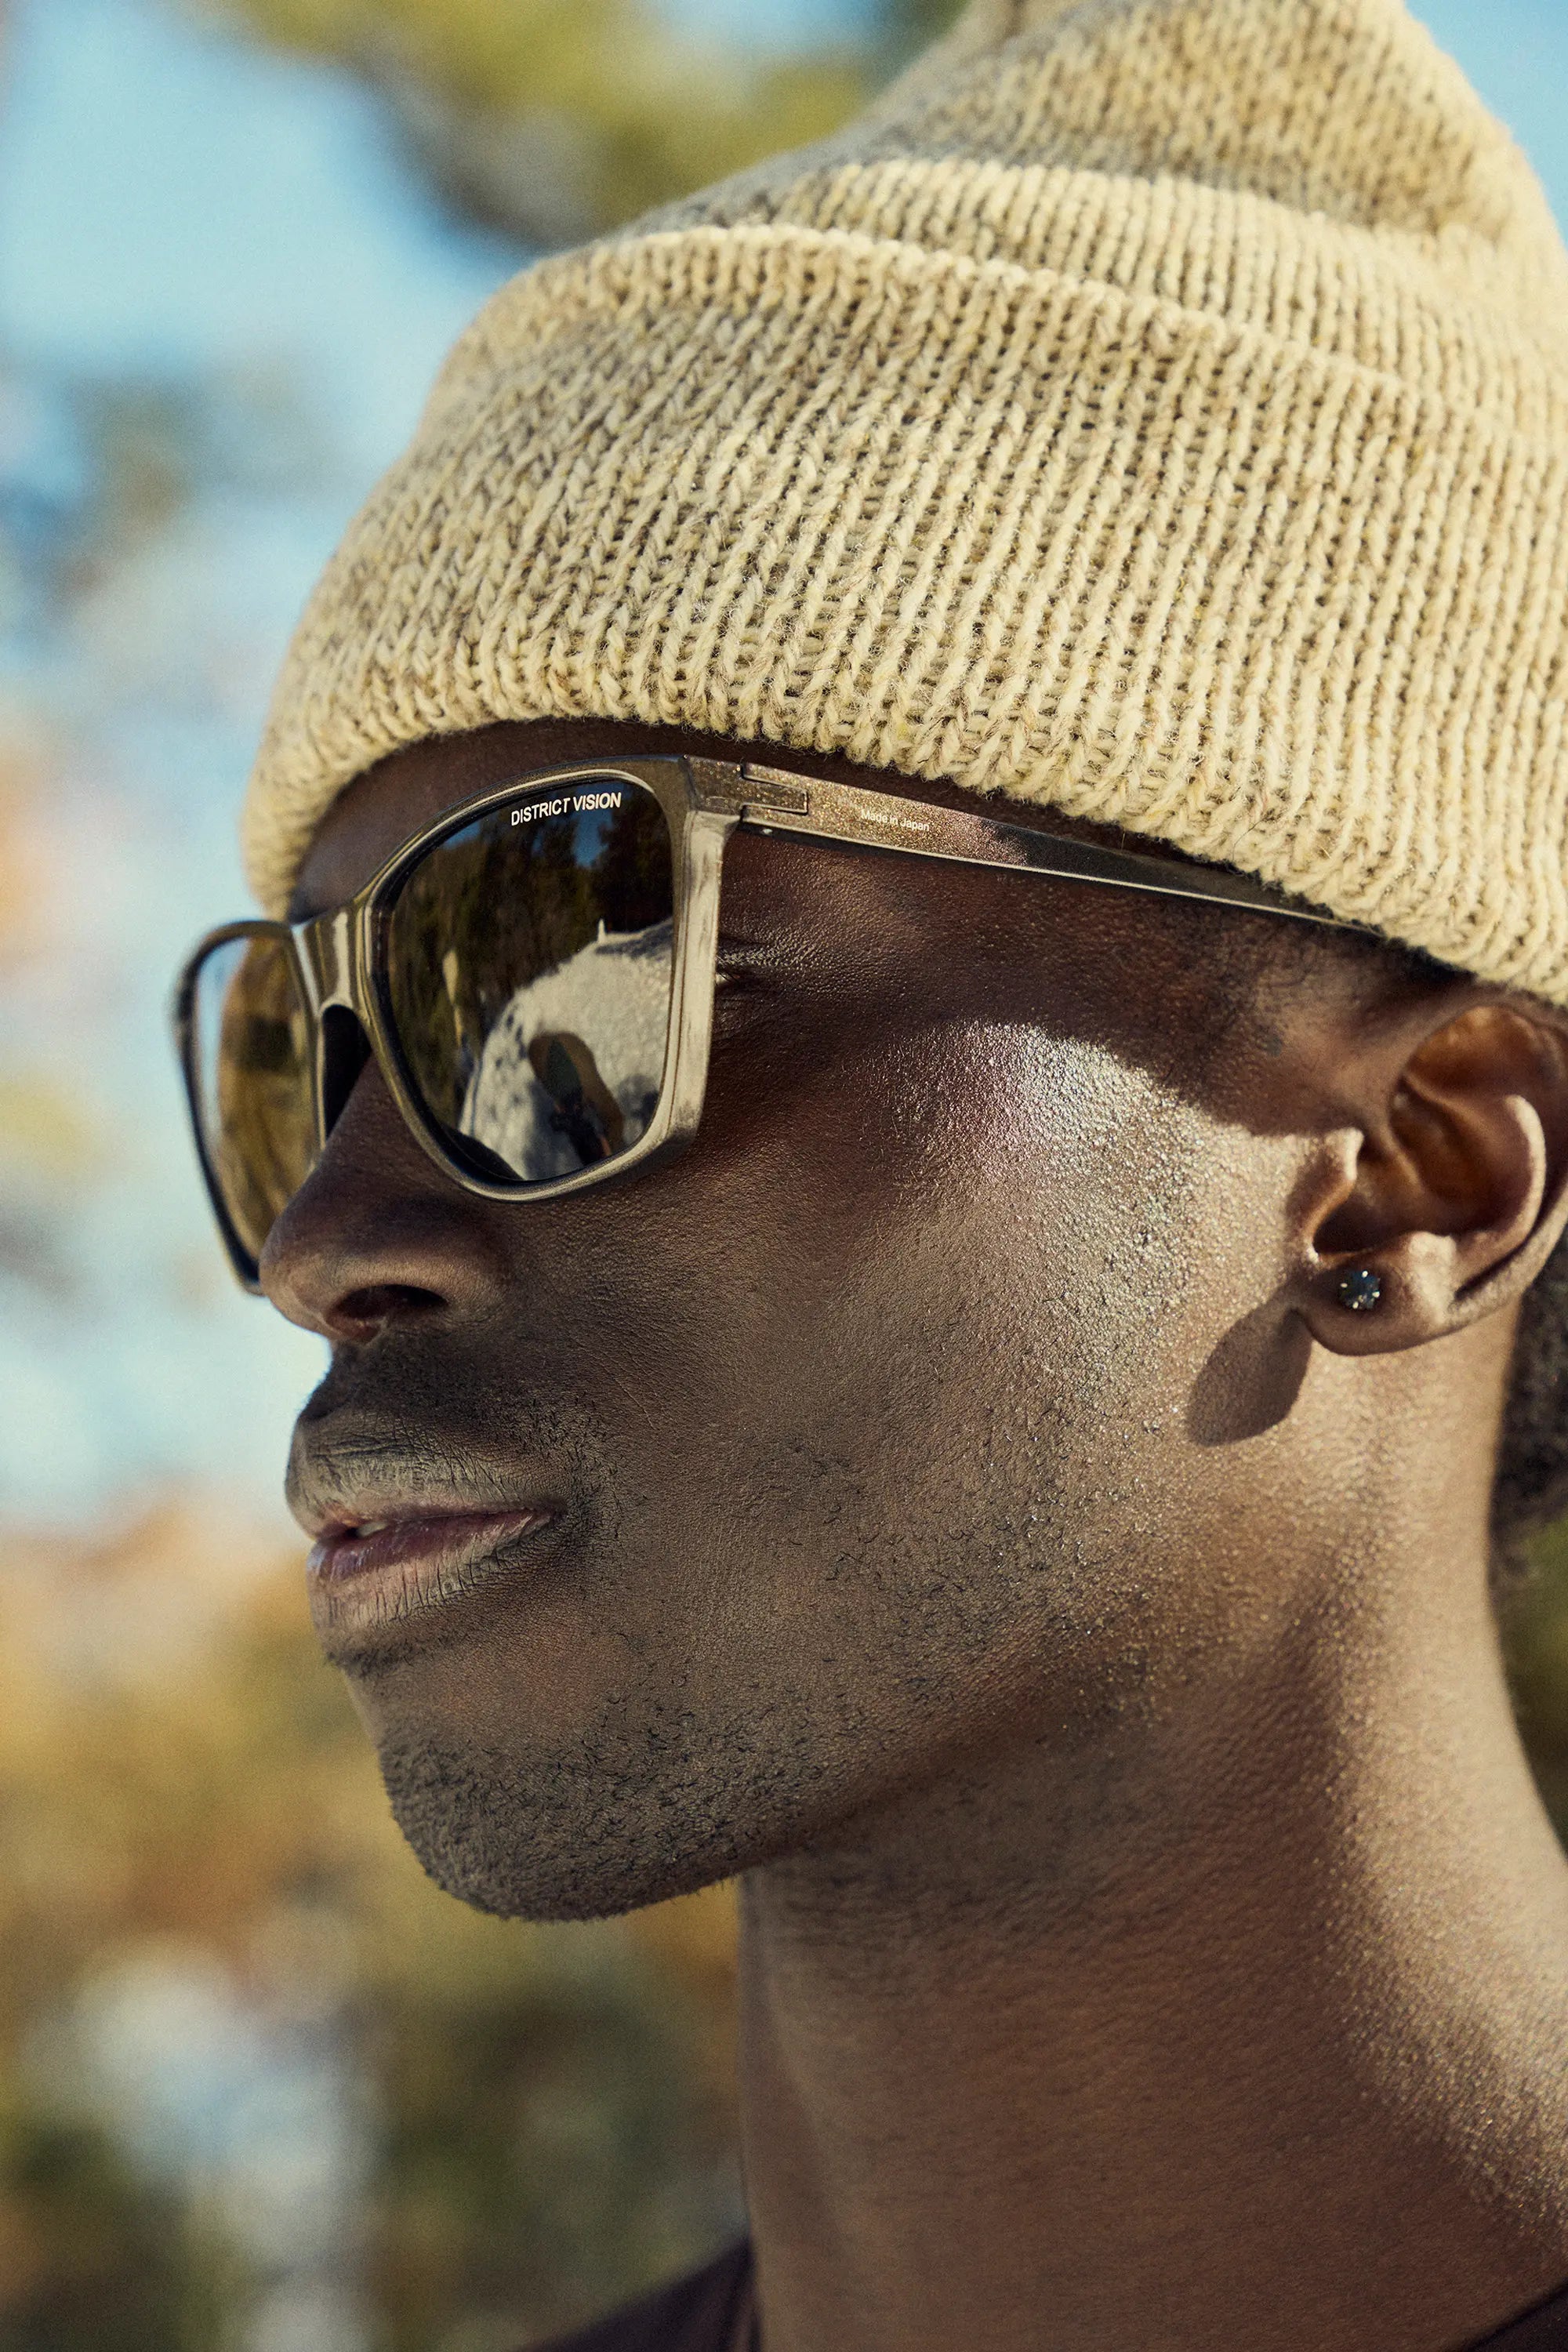 District Vision Has Engineered the Best Summer Running Sunglasses